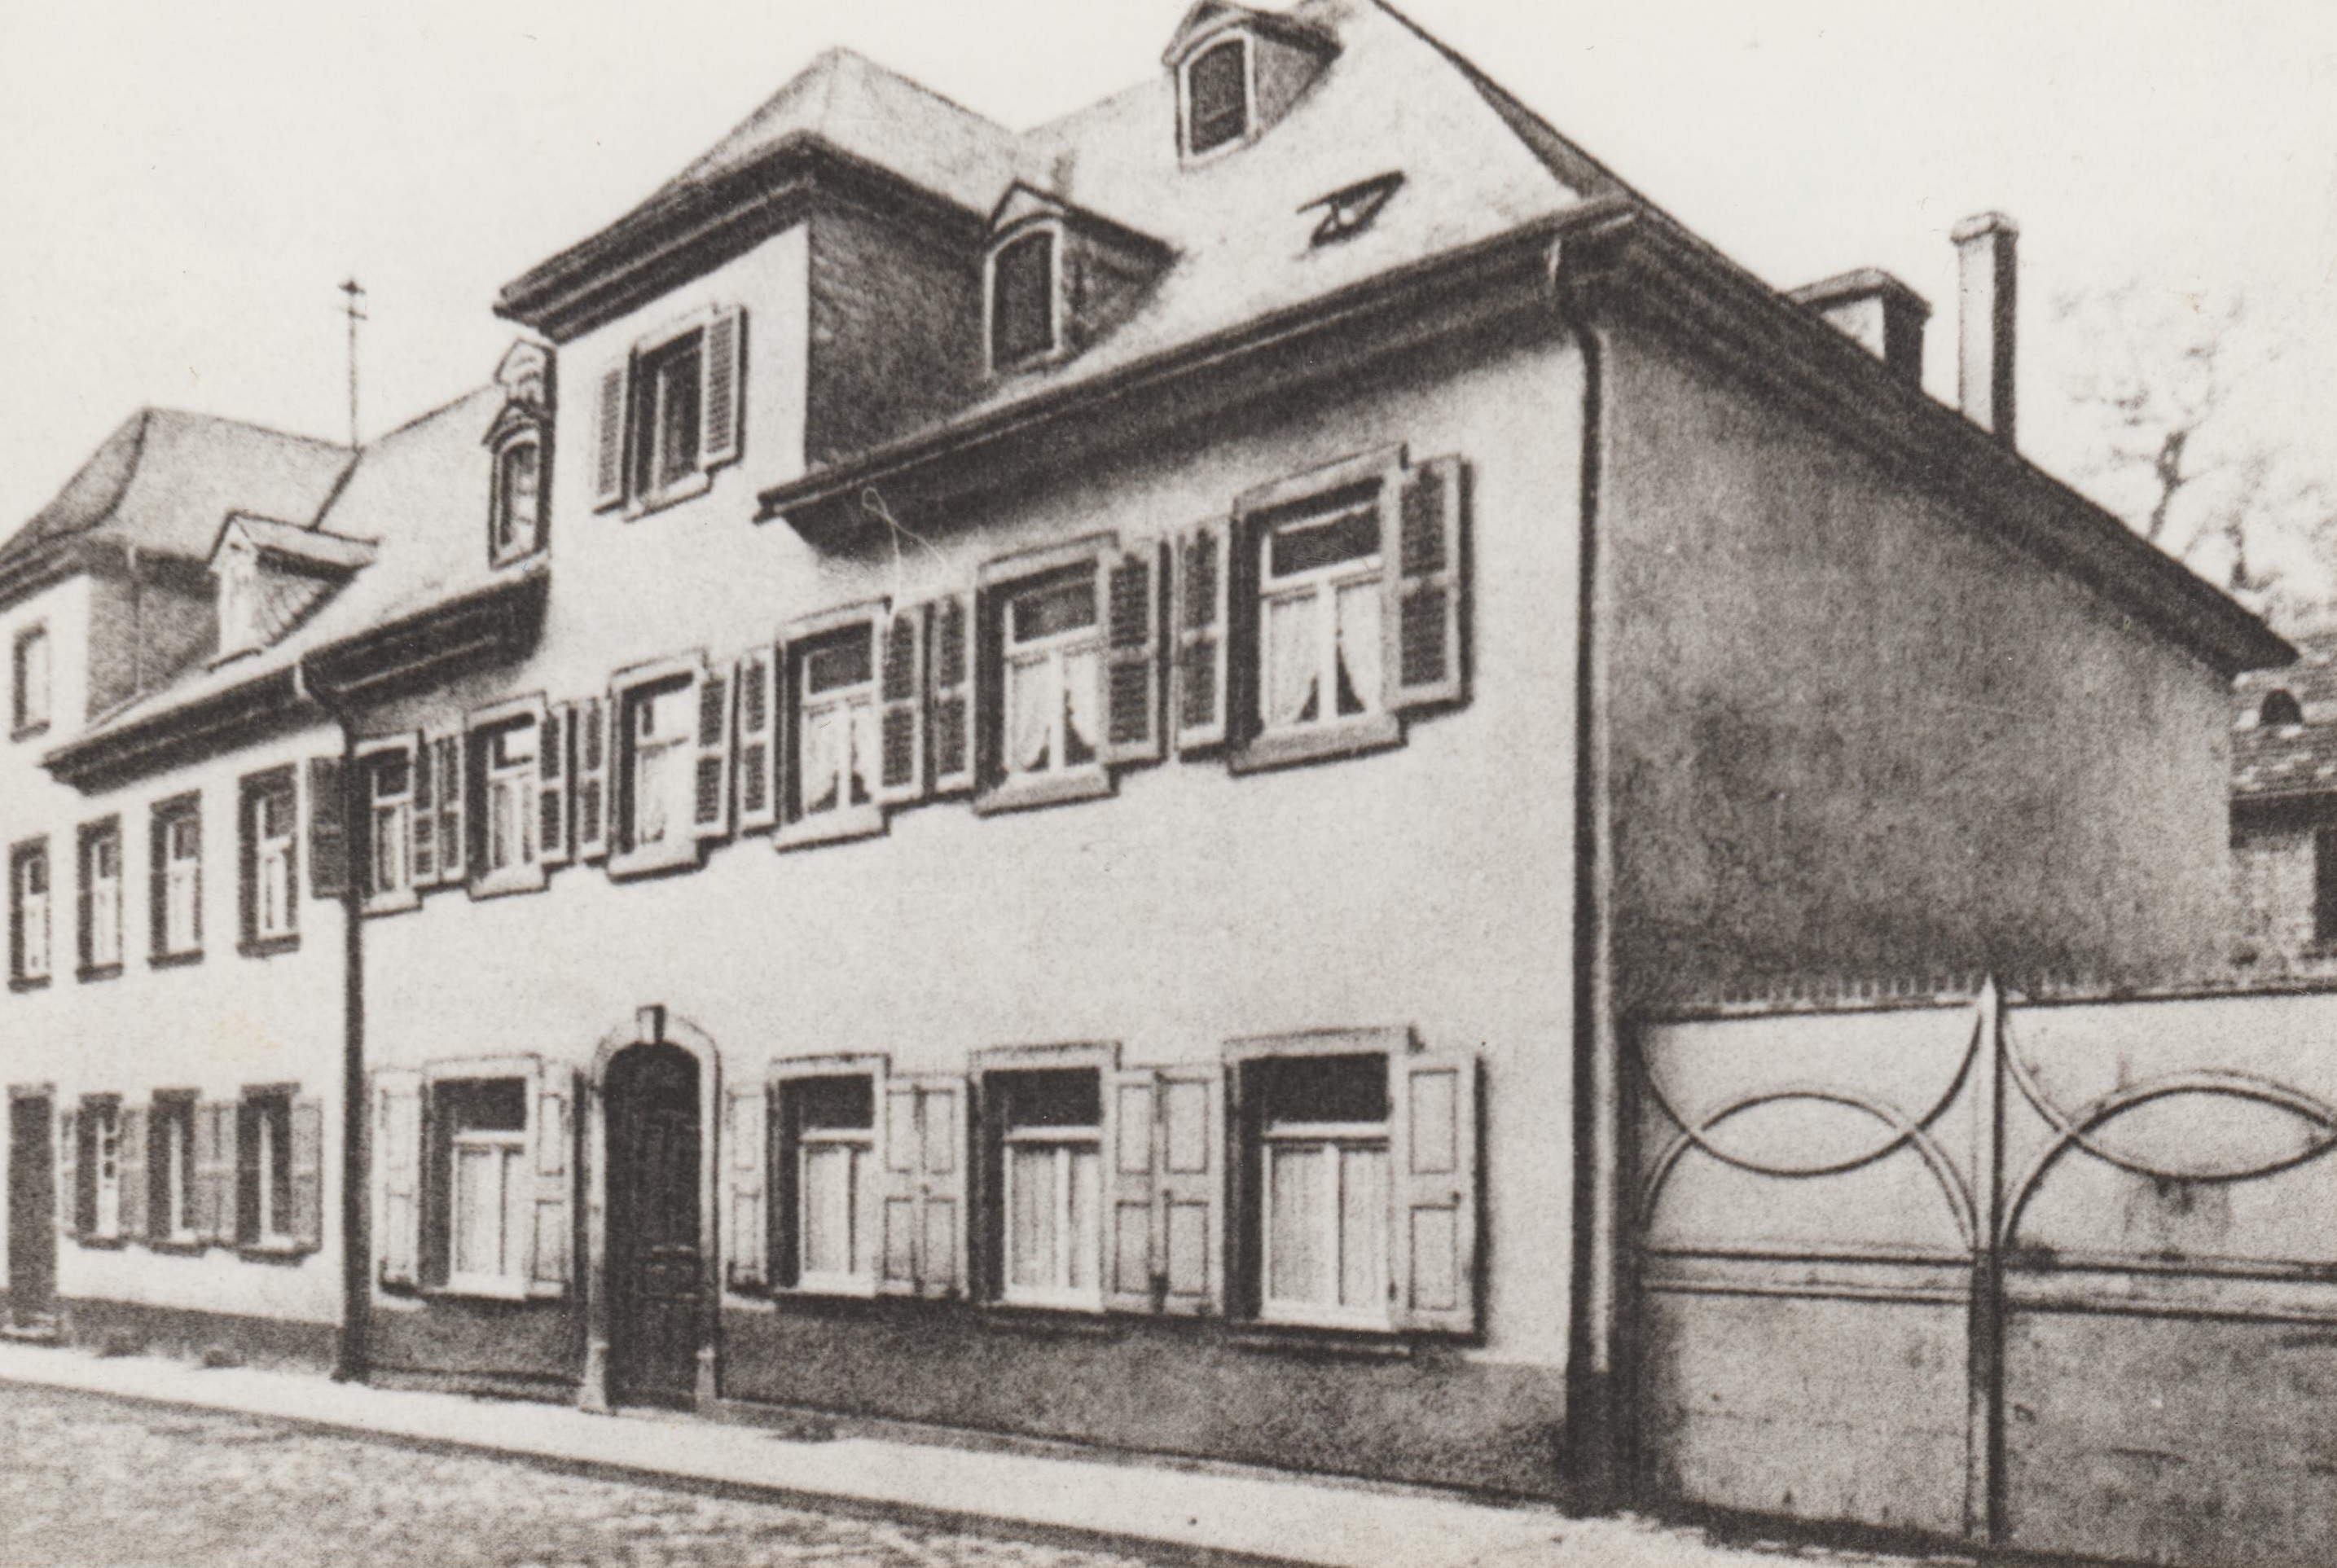 Obere Bachstrasse in Bendorf 1927/28, Schuhhaus Fries (REM CC BY-NC-SA)